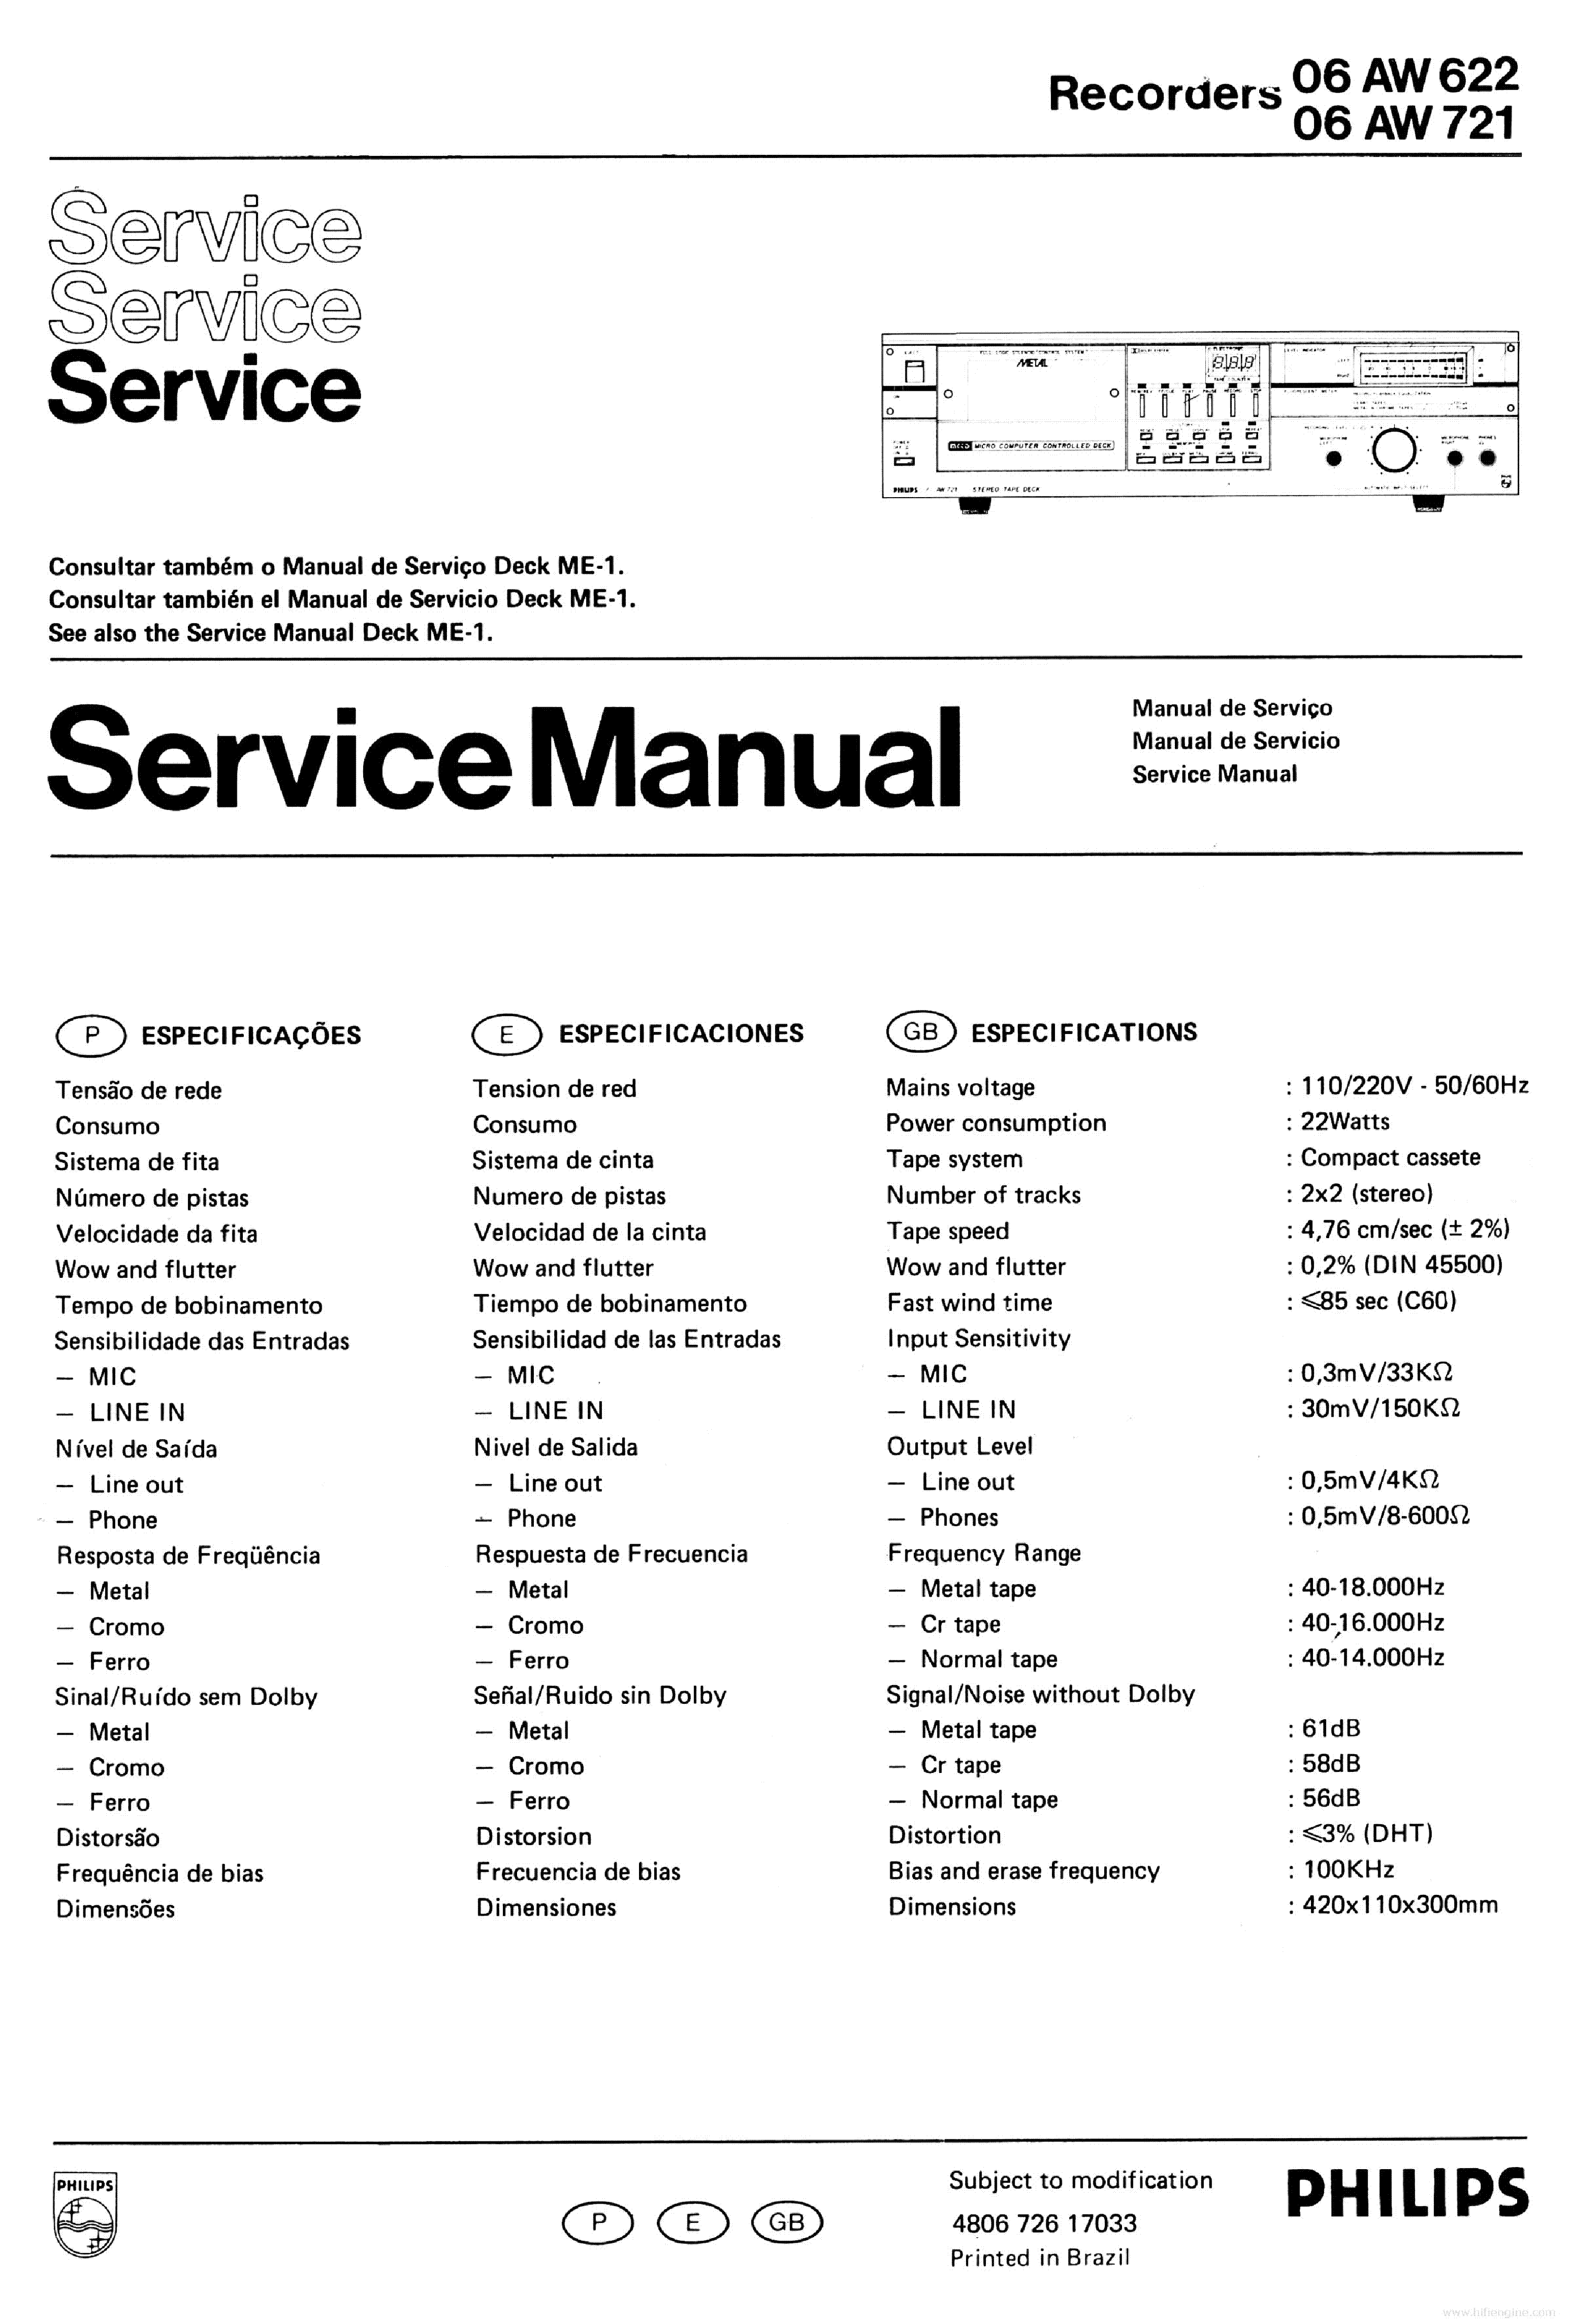 PHILIPS AW-622 AW-721 SM service manual (1st page)